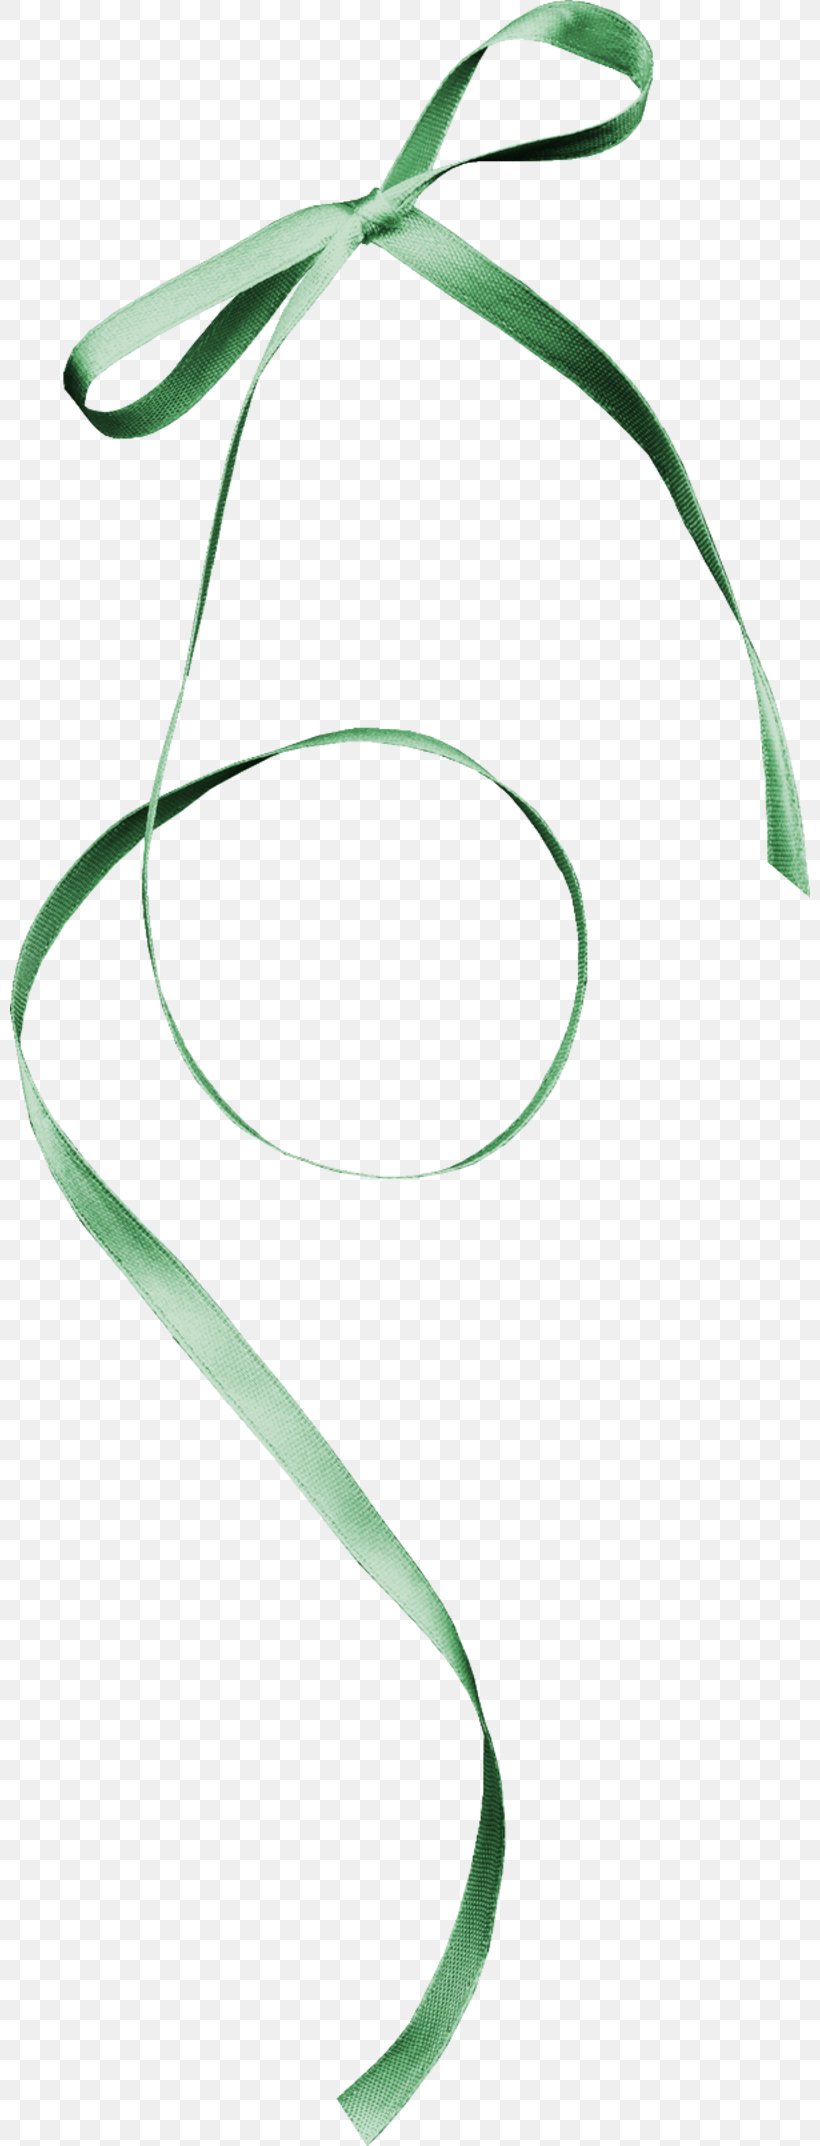 Painting Plant Stem Clip Art, PNG, 800x2146px, Painting, Flower, Green, Leaf, Plant Download Free